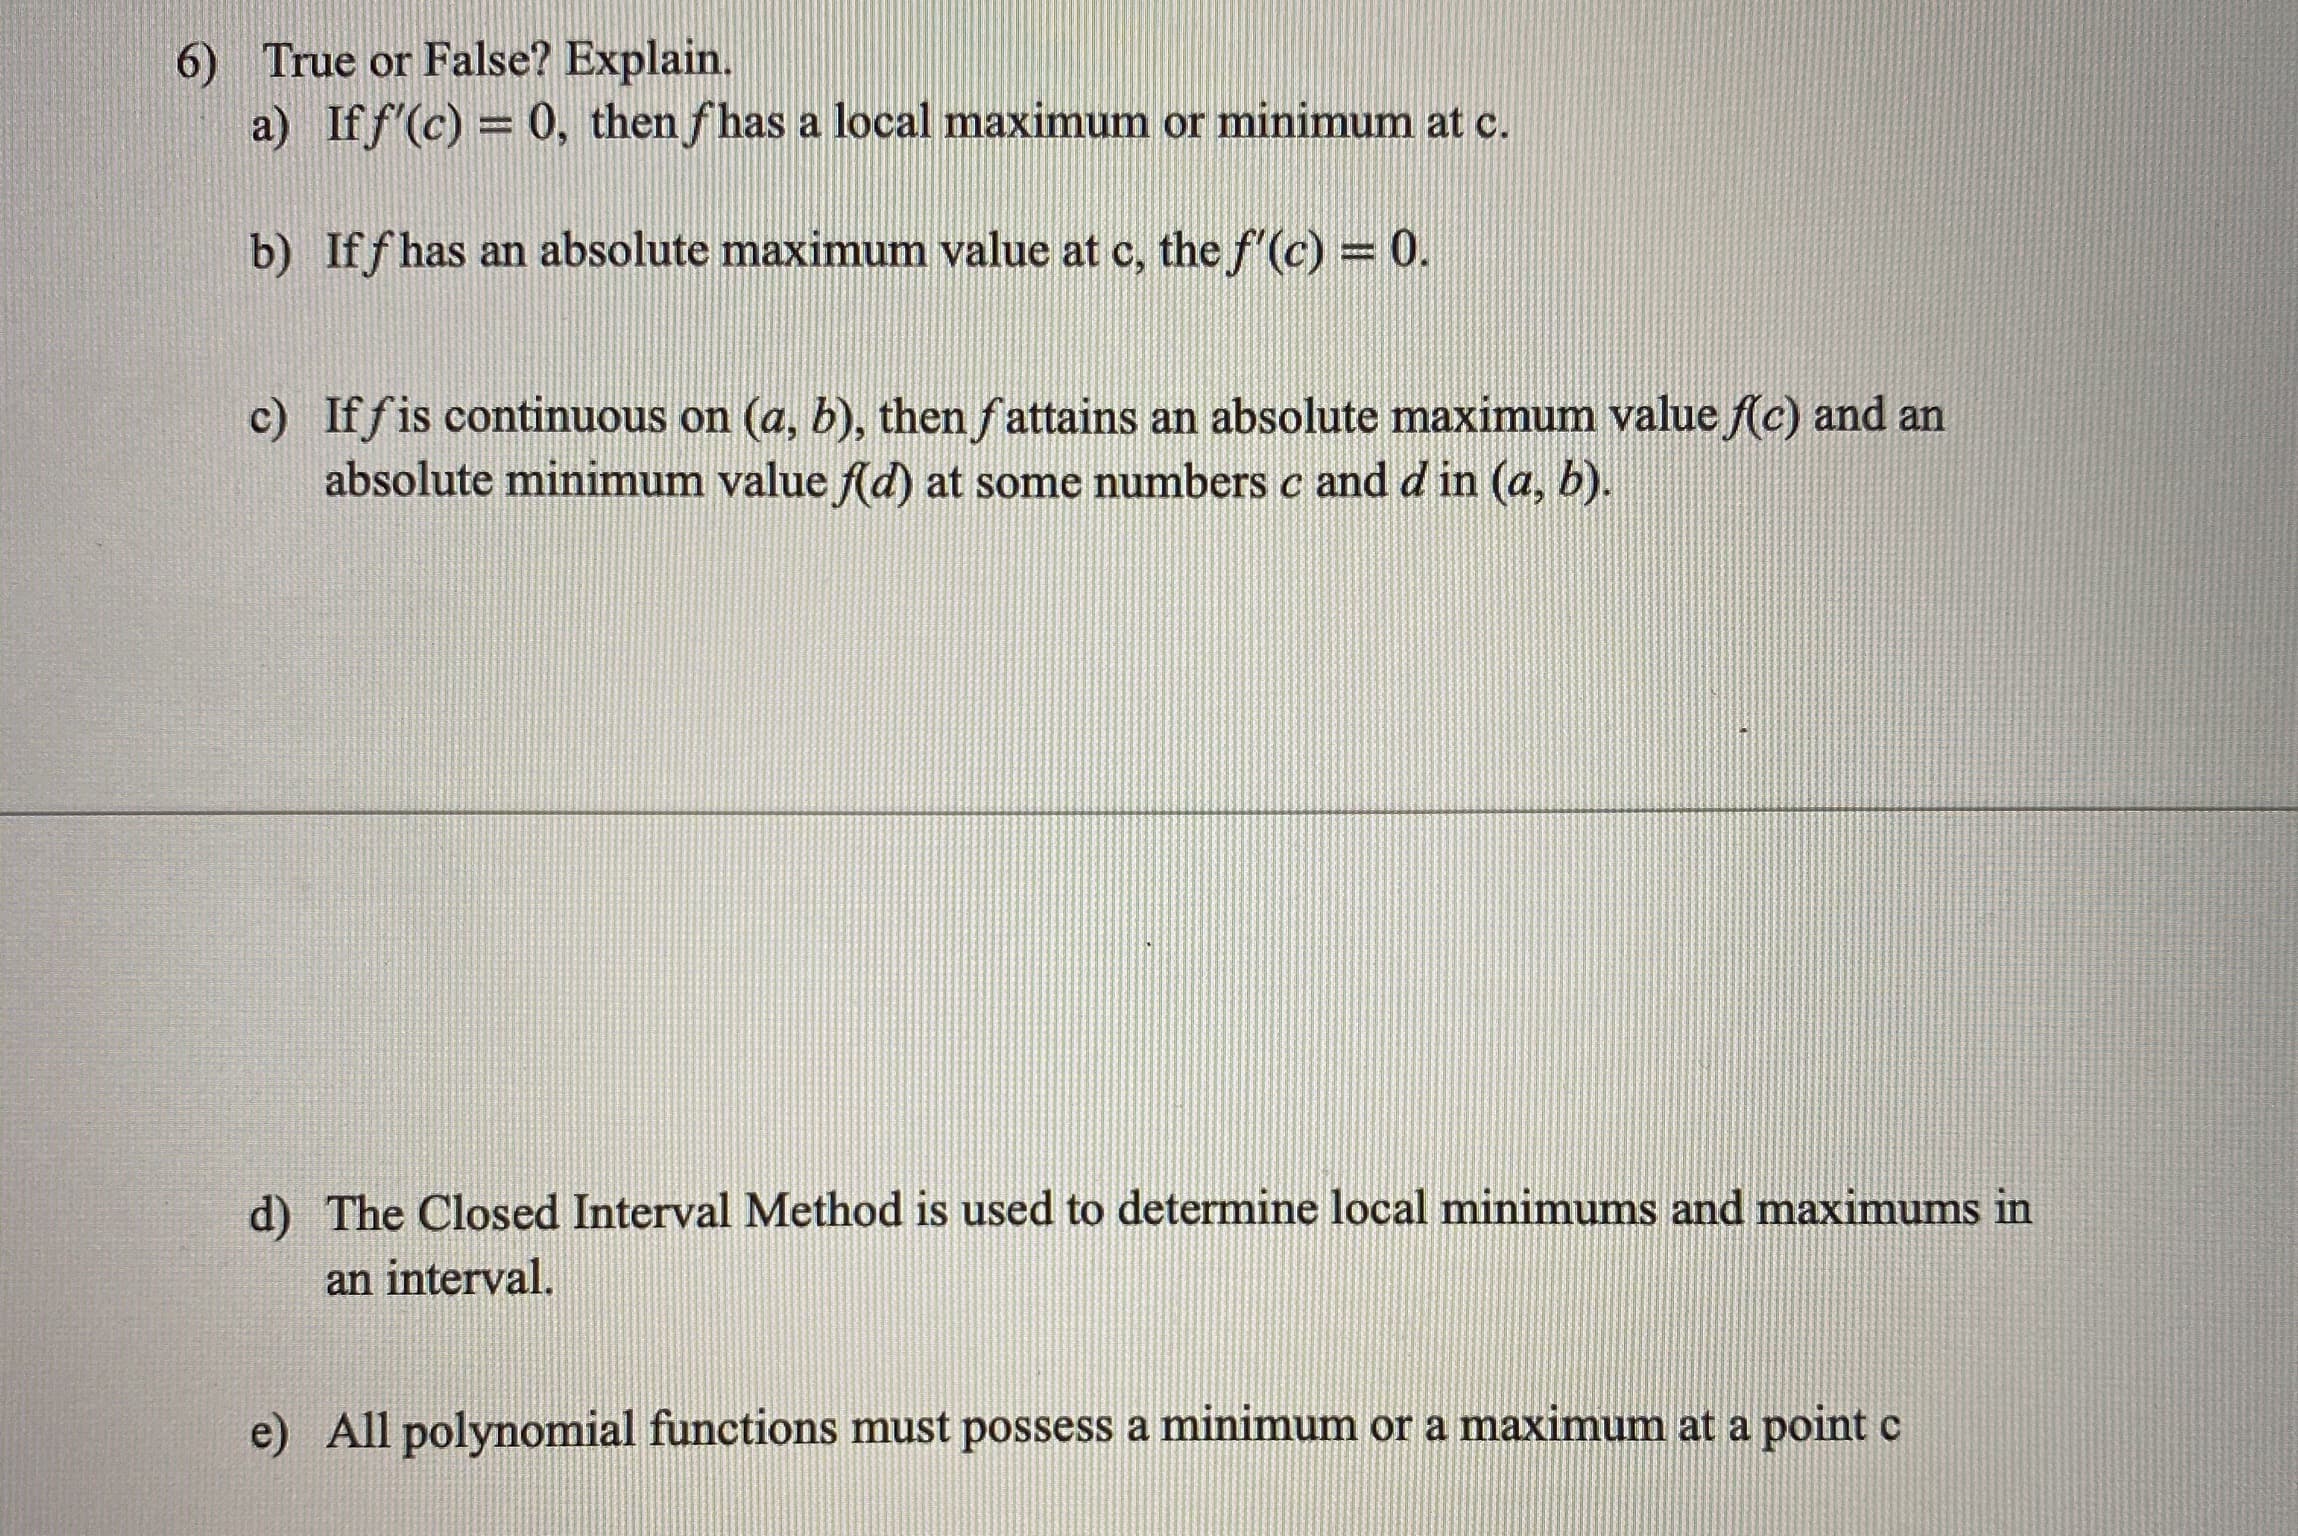 6) True or False? Explain.
a) If f'(c) = 0, then fhas a local maximum or minimum at c.
b) Iff has an absolute maximum value at c, the f'(c) = 0.
c) If fis continuous on (a, b), then fattains an absolute maximum value f(c) and an
absolute minimum value f(d) at some numbers c and d in (a, b).
